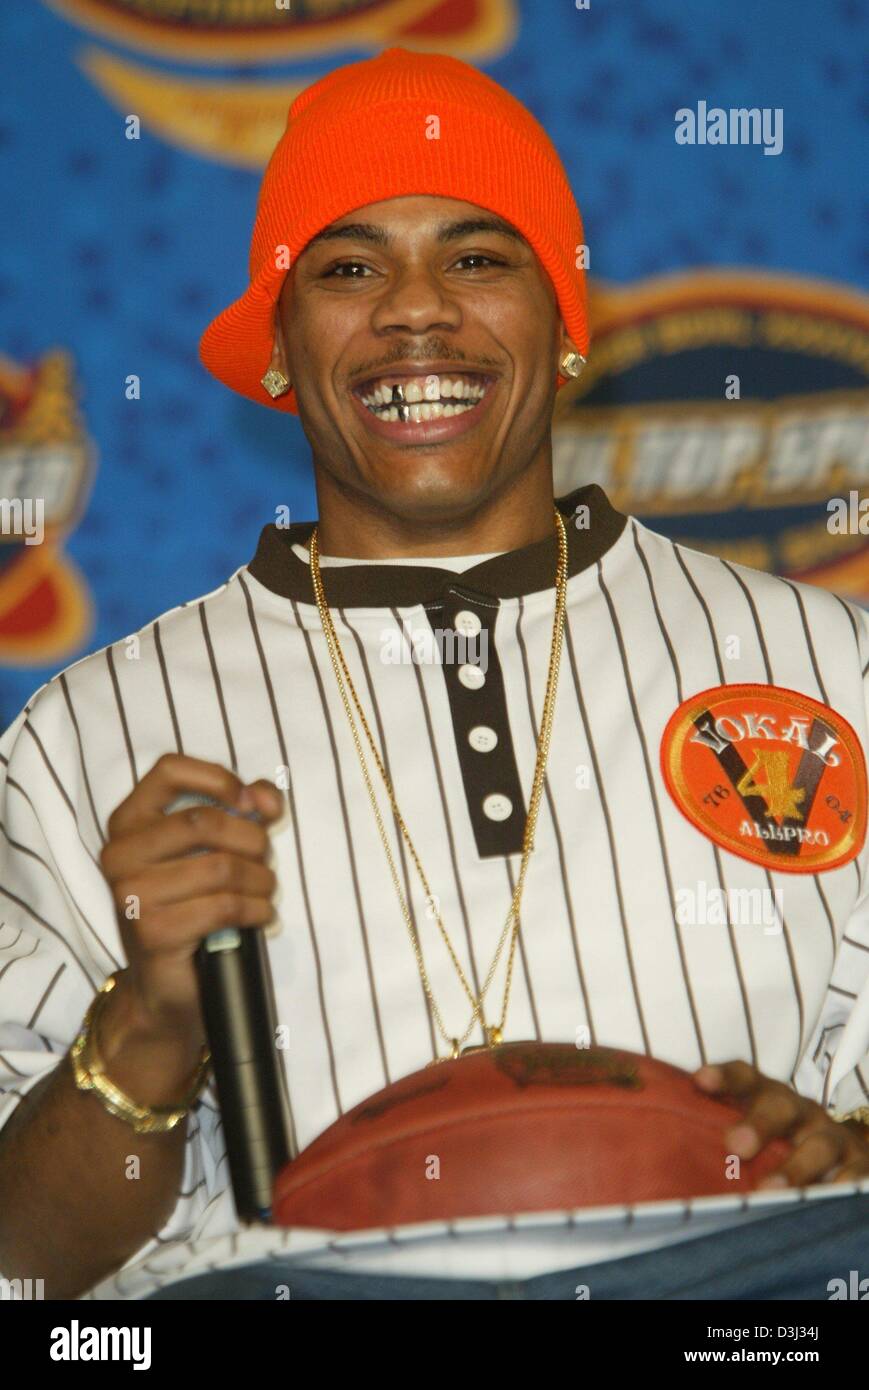 dpa-us-rapper-nelly-smiles-as-he-attends-a-press-conference-on-the-D3J34J.jpg